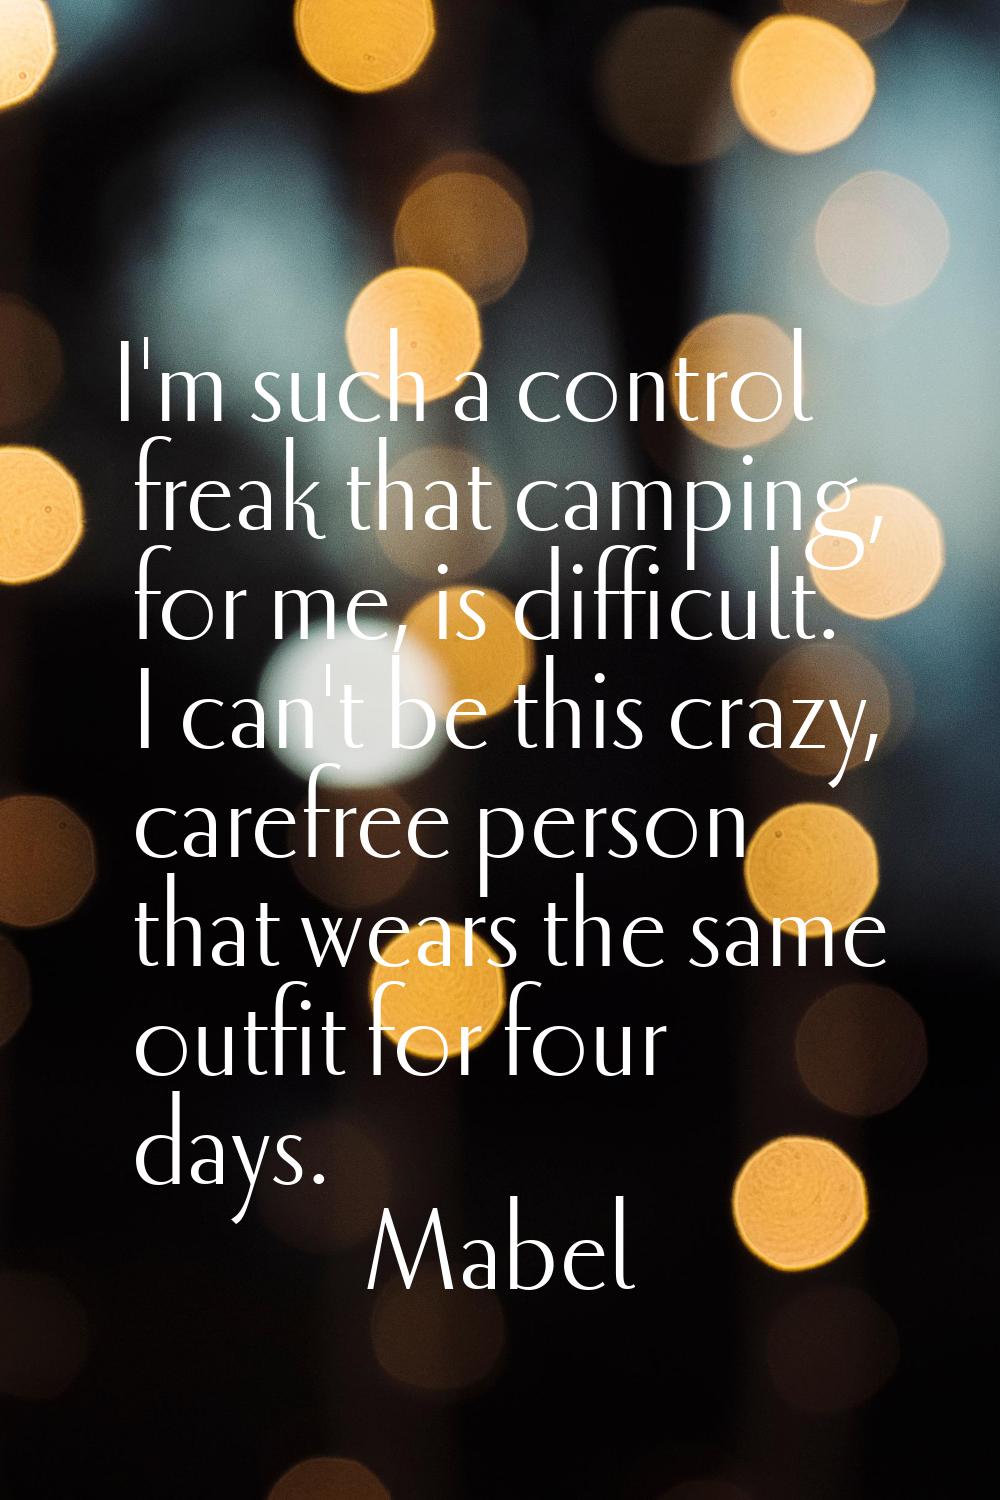 I'm such a control freak that camping, for me, is difficult. I can't be this crazy, carefree person